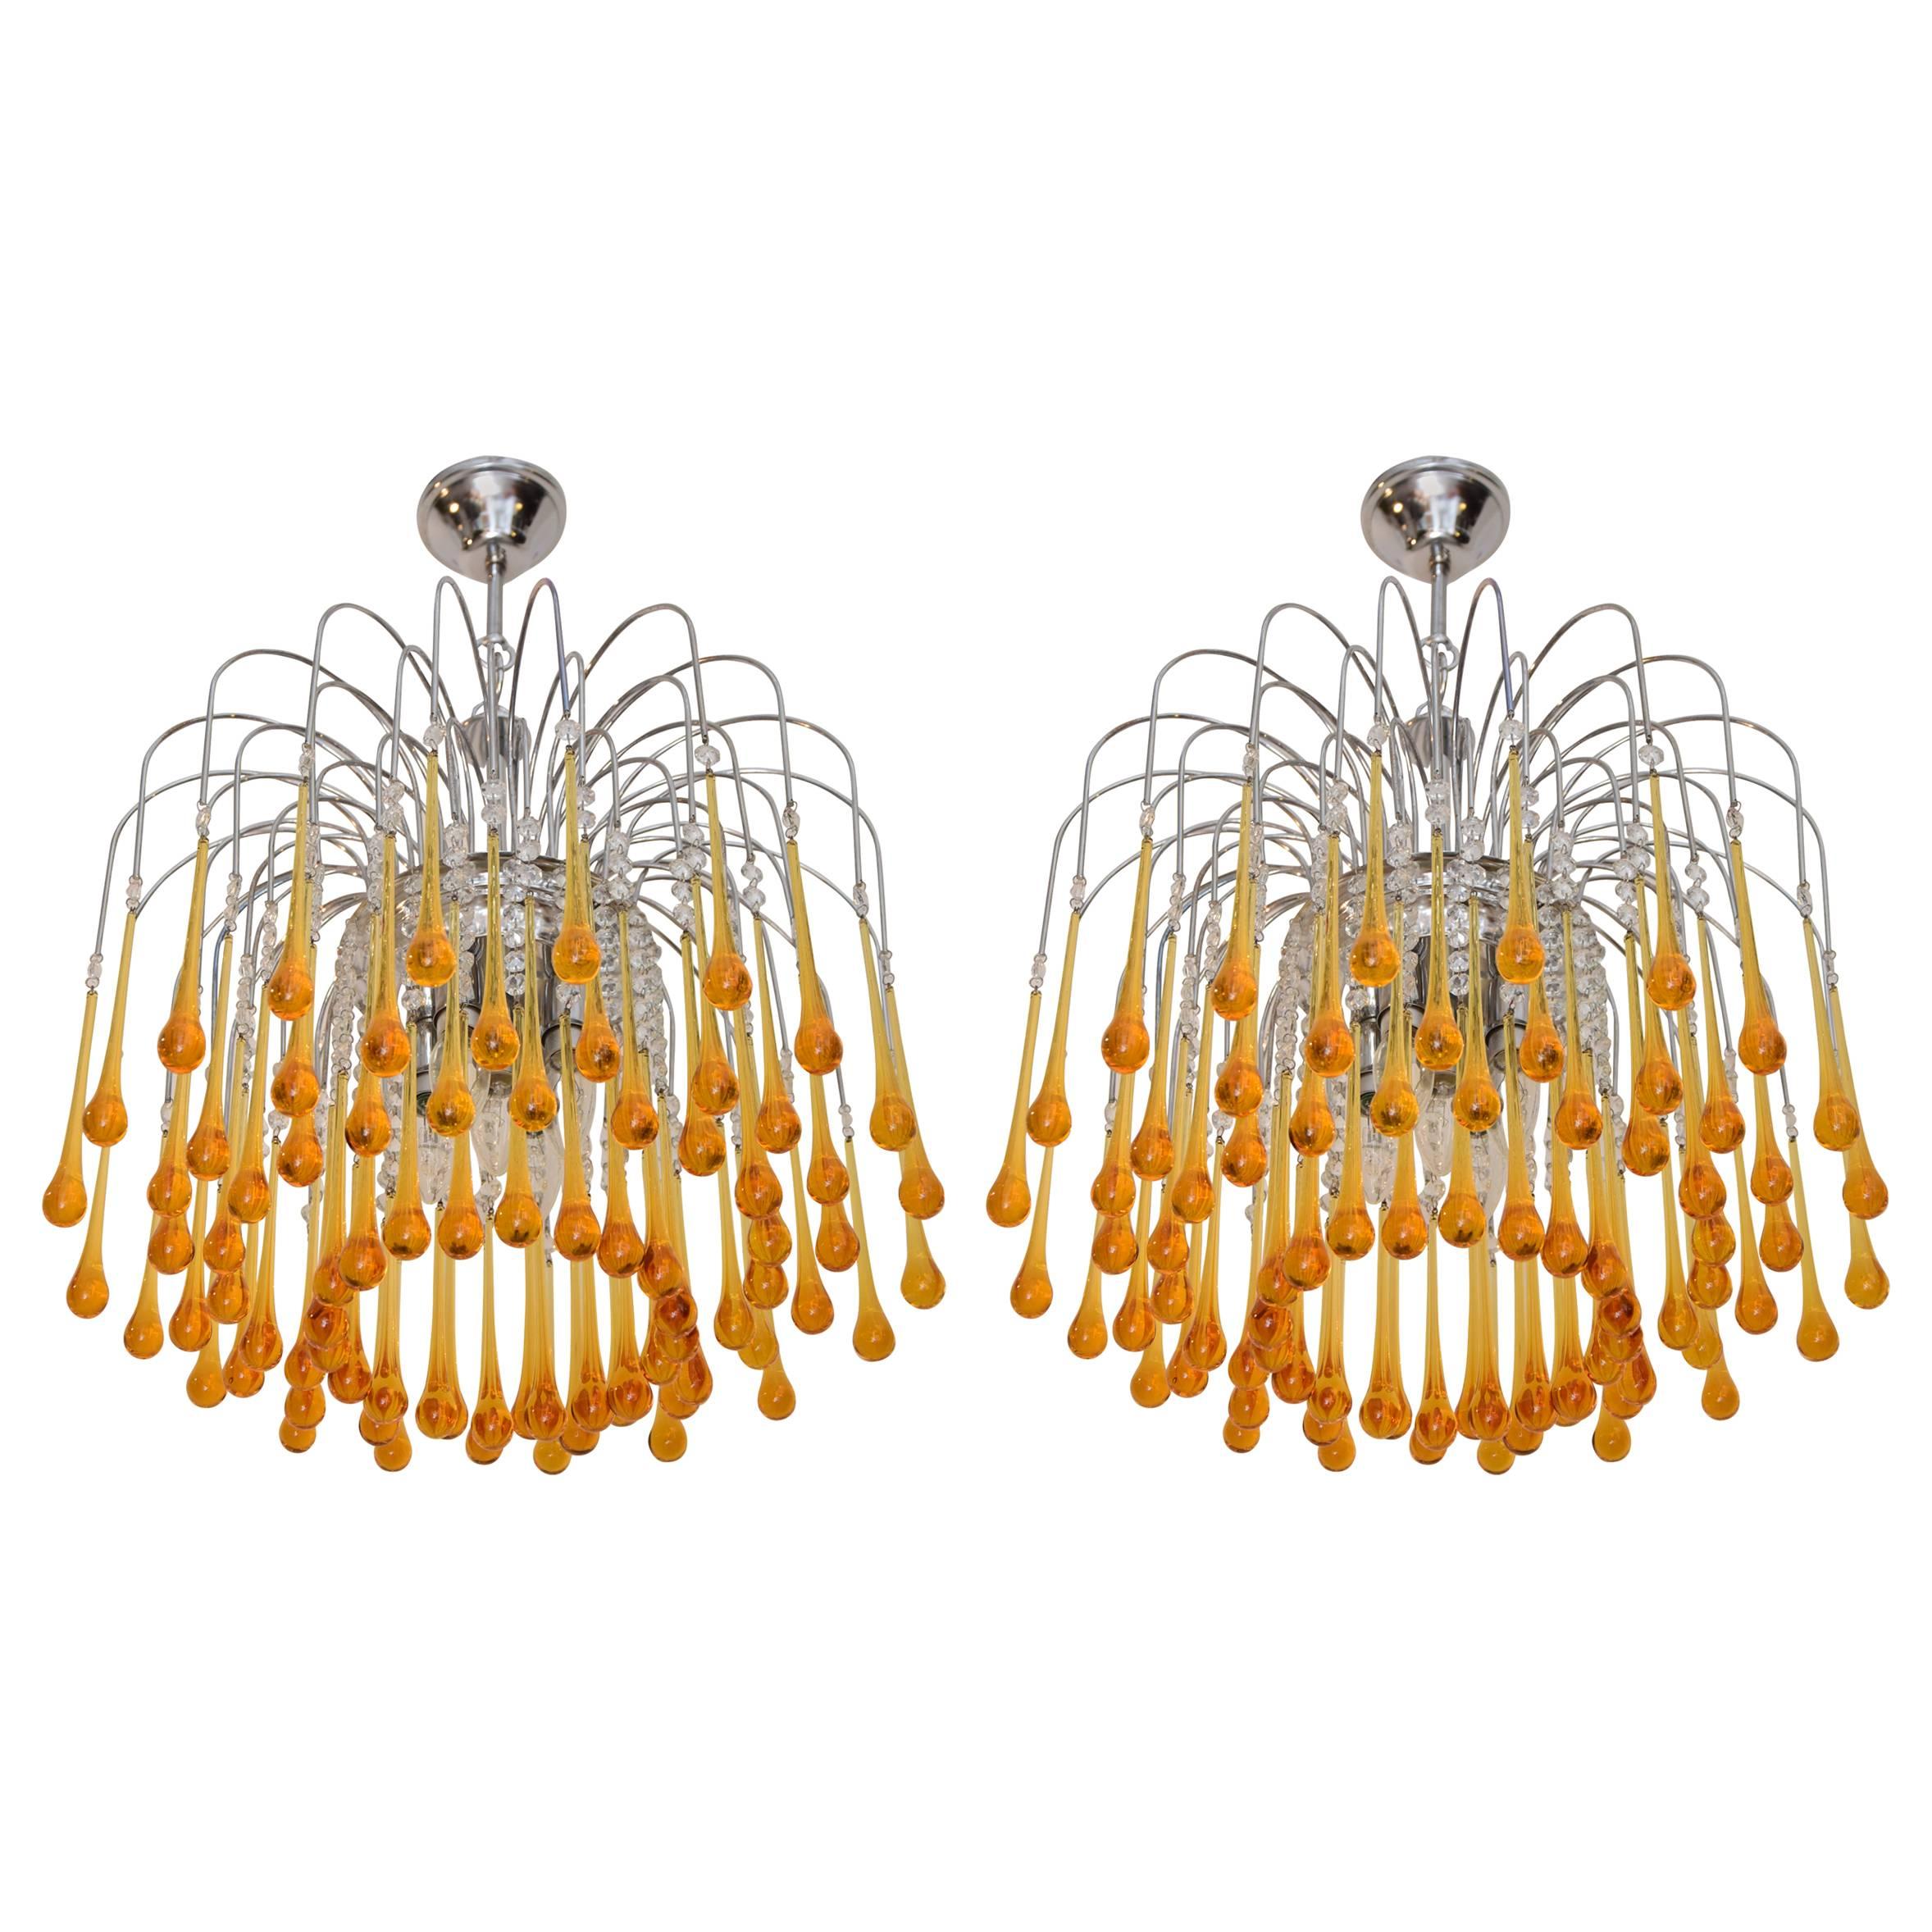 Two Murano Chandelier in the style of Venini, 1960s